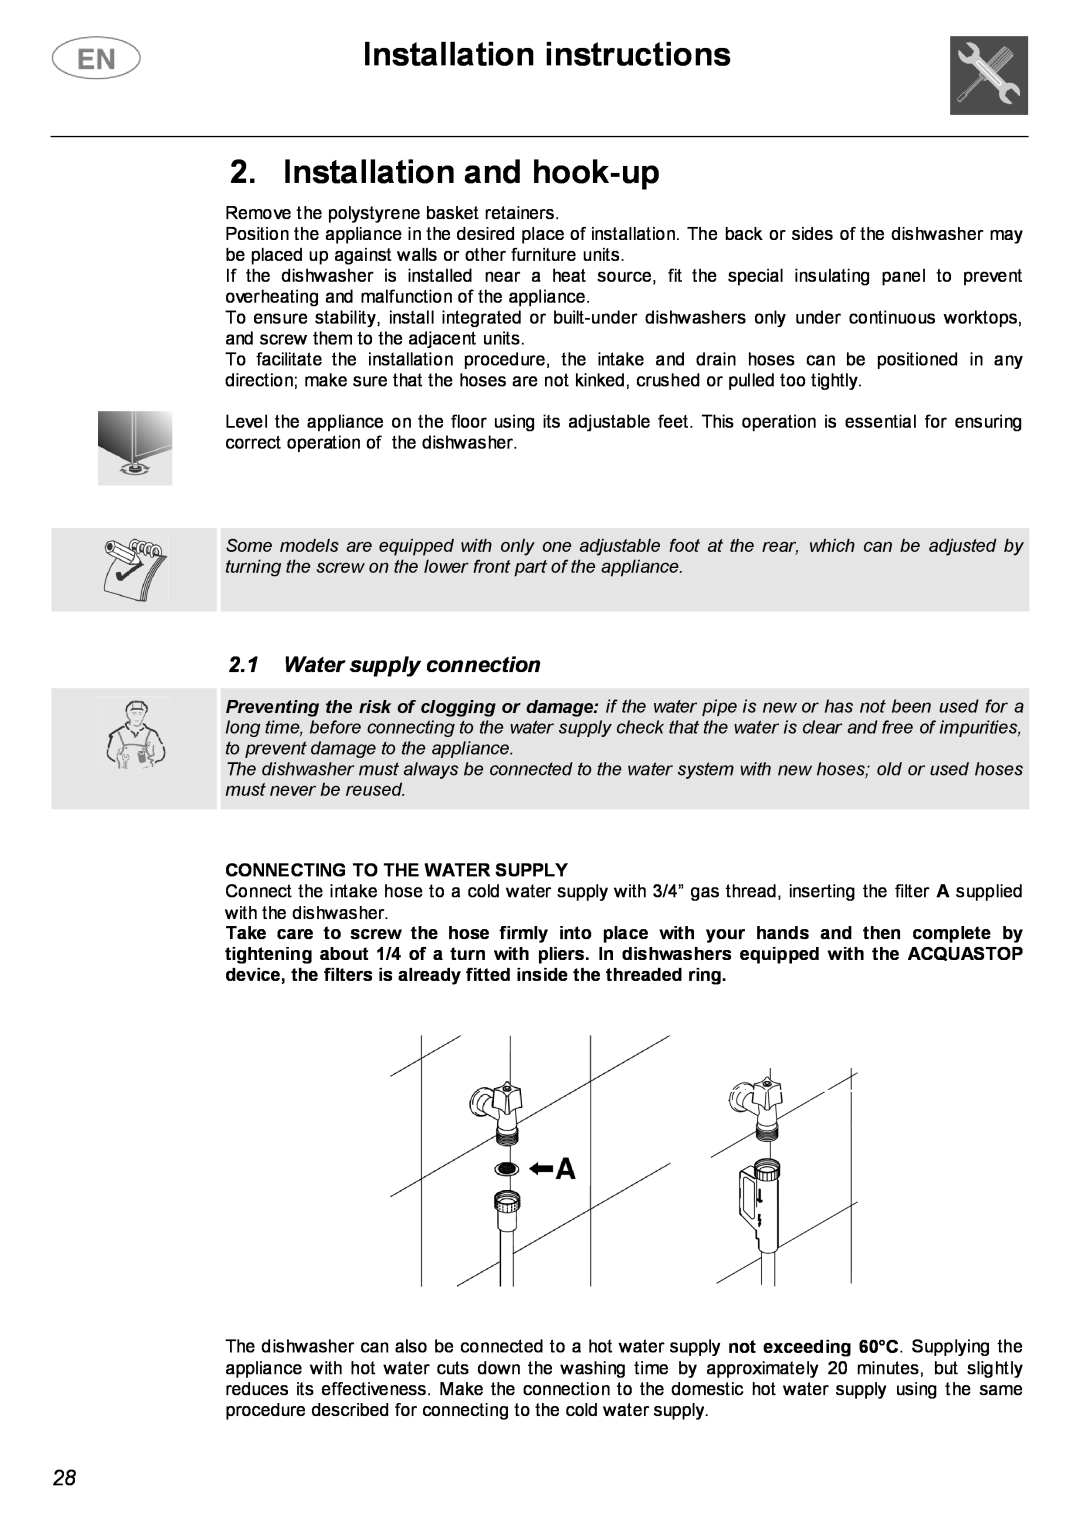 Smeg PL19K Installation instructions 2. Installation and hook-up, Water supply connection, Connecting To The Water Supply 